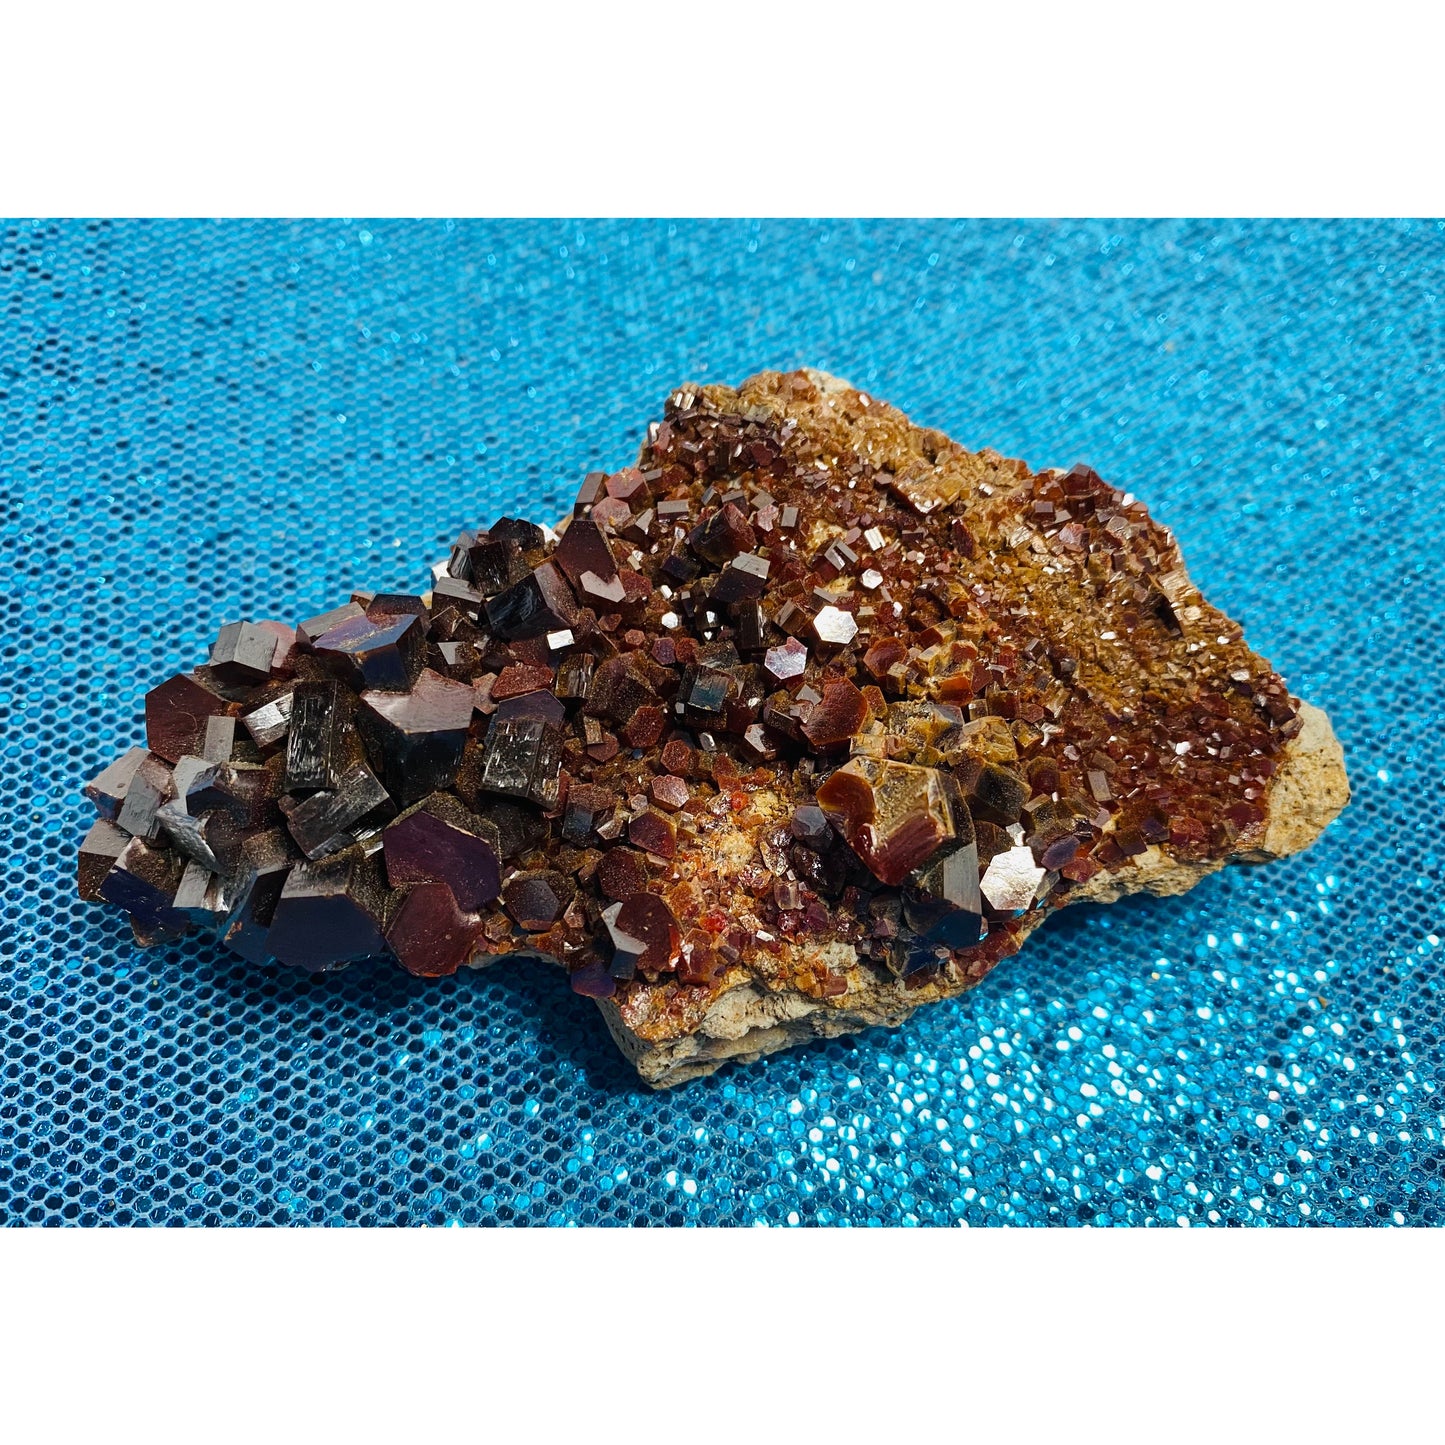 Vanadinite crystals for order, structure and so much more!